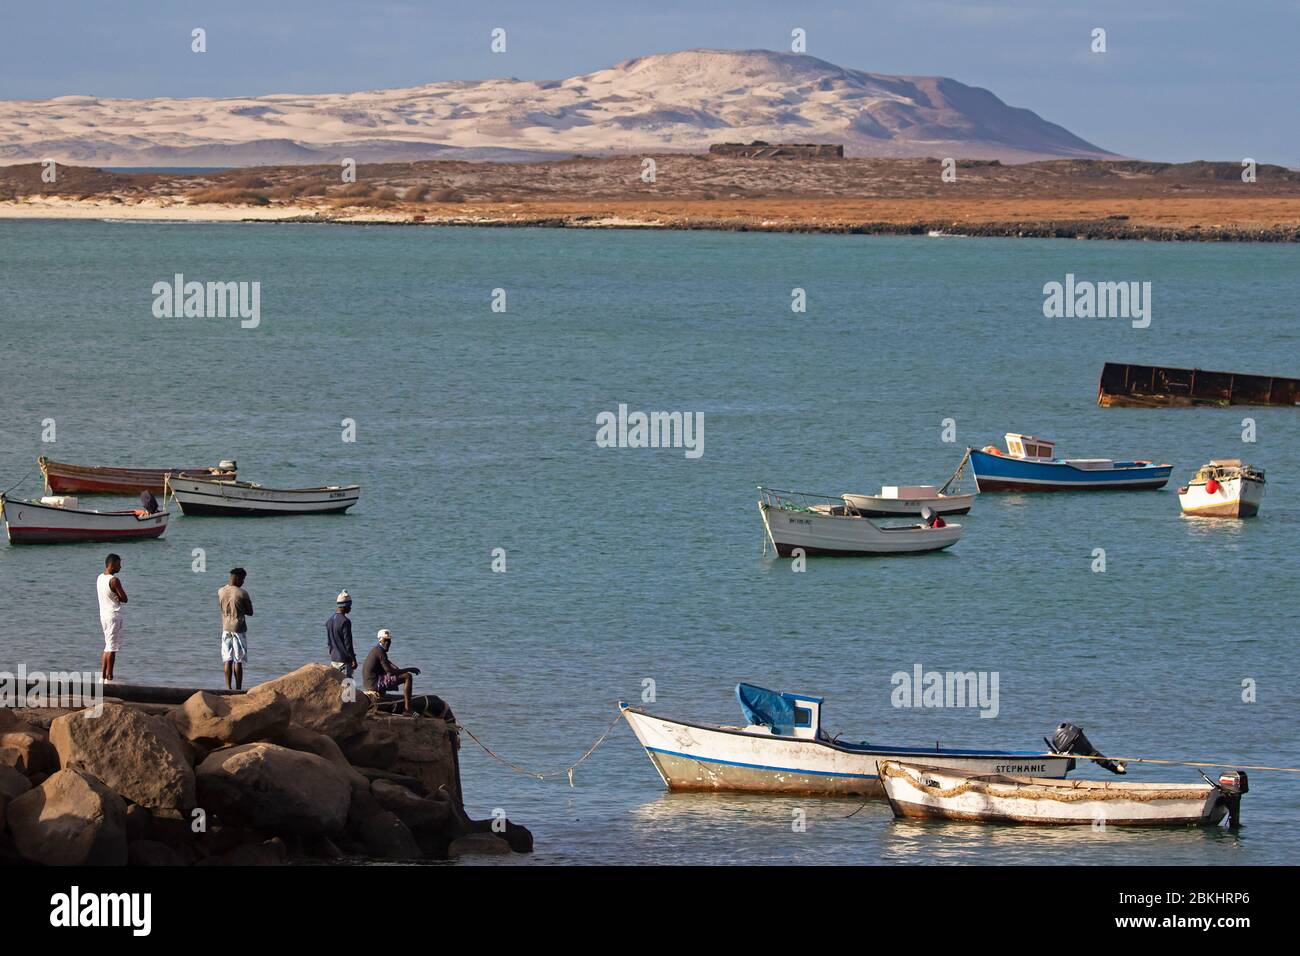 Fishermen and little fishing boats in the small harbour of Sal Rei on the island Boa Vista, Cape Verde / Cabo Verde archipelago in the Atlantic Ocean Stock Photo